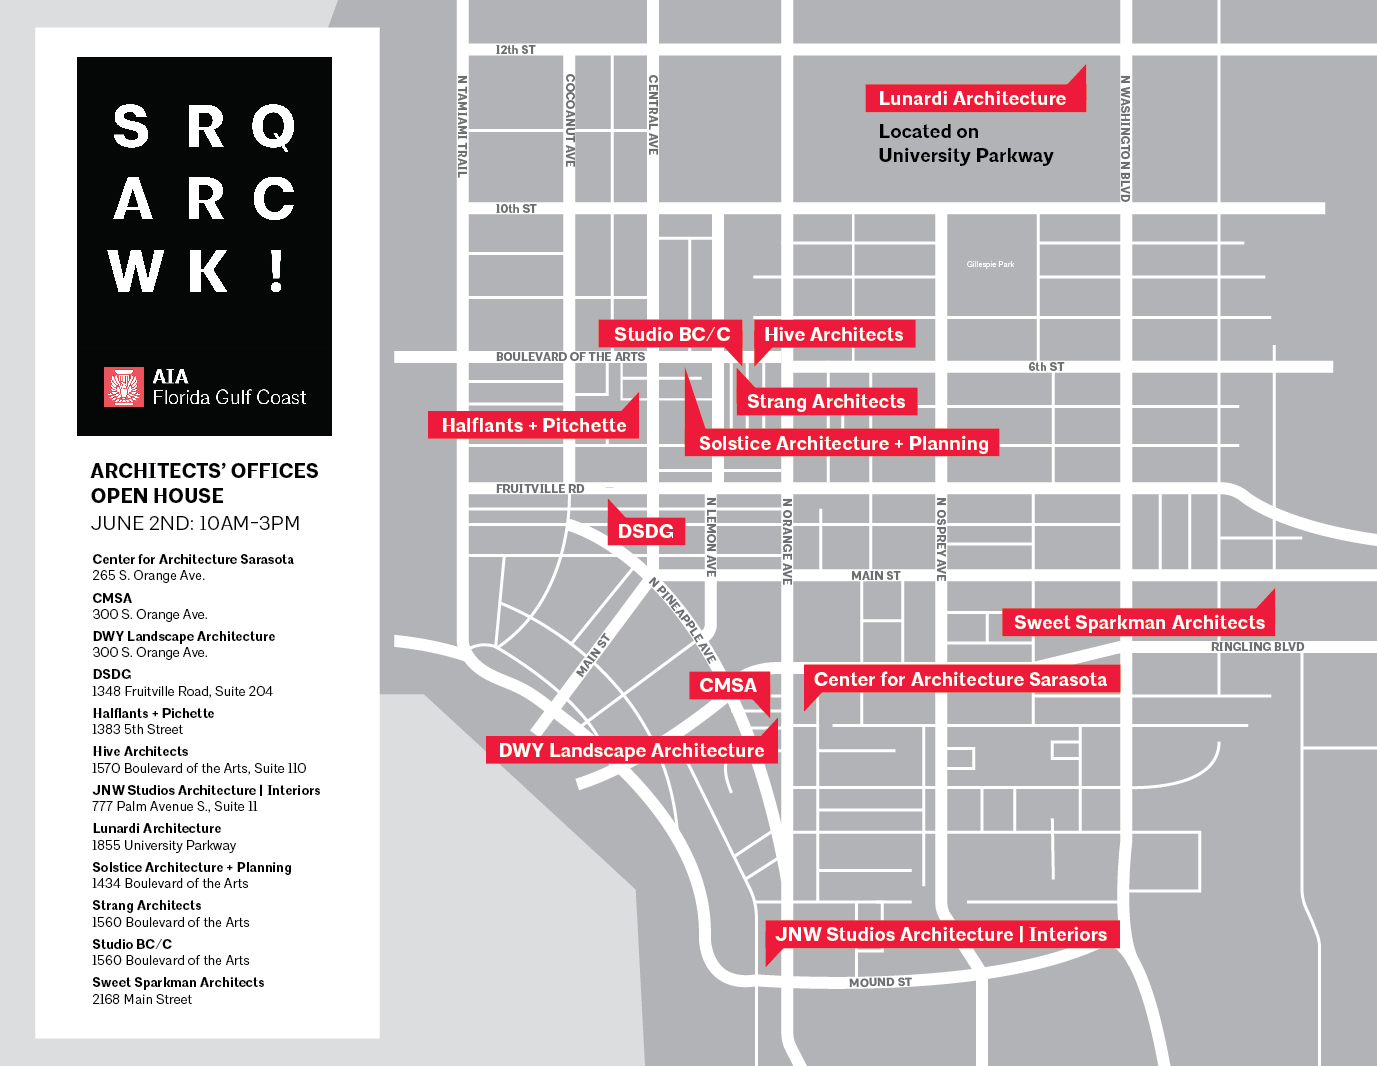 This map locates every major event taking place during the inaugural Sarasota Architecture Week. Courtesy image